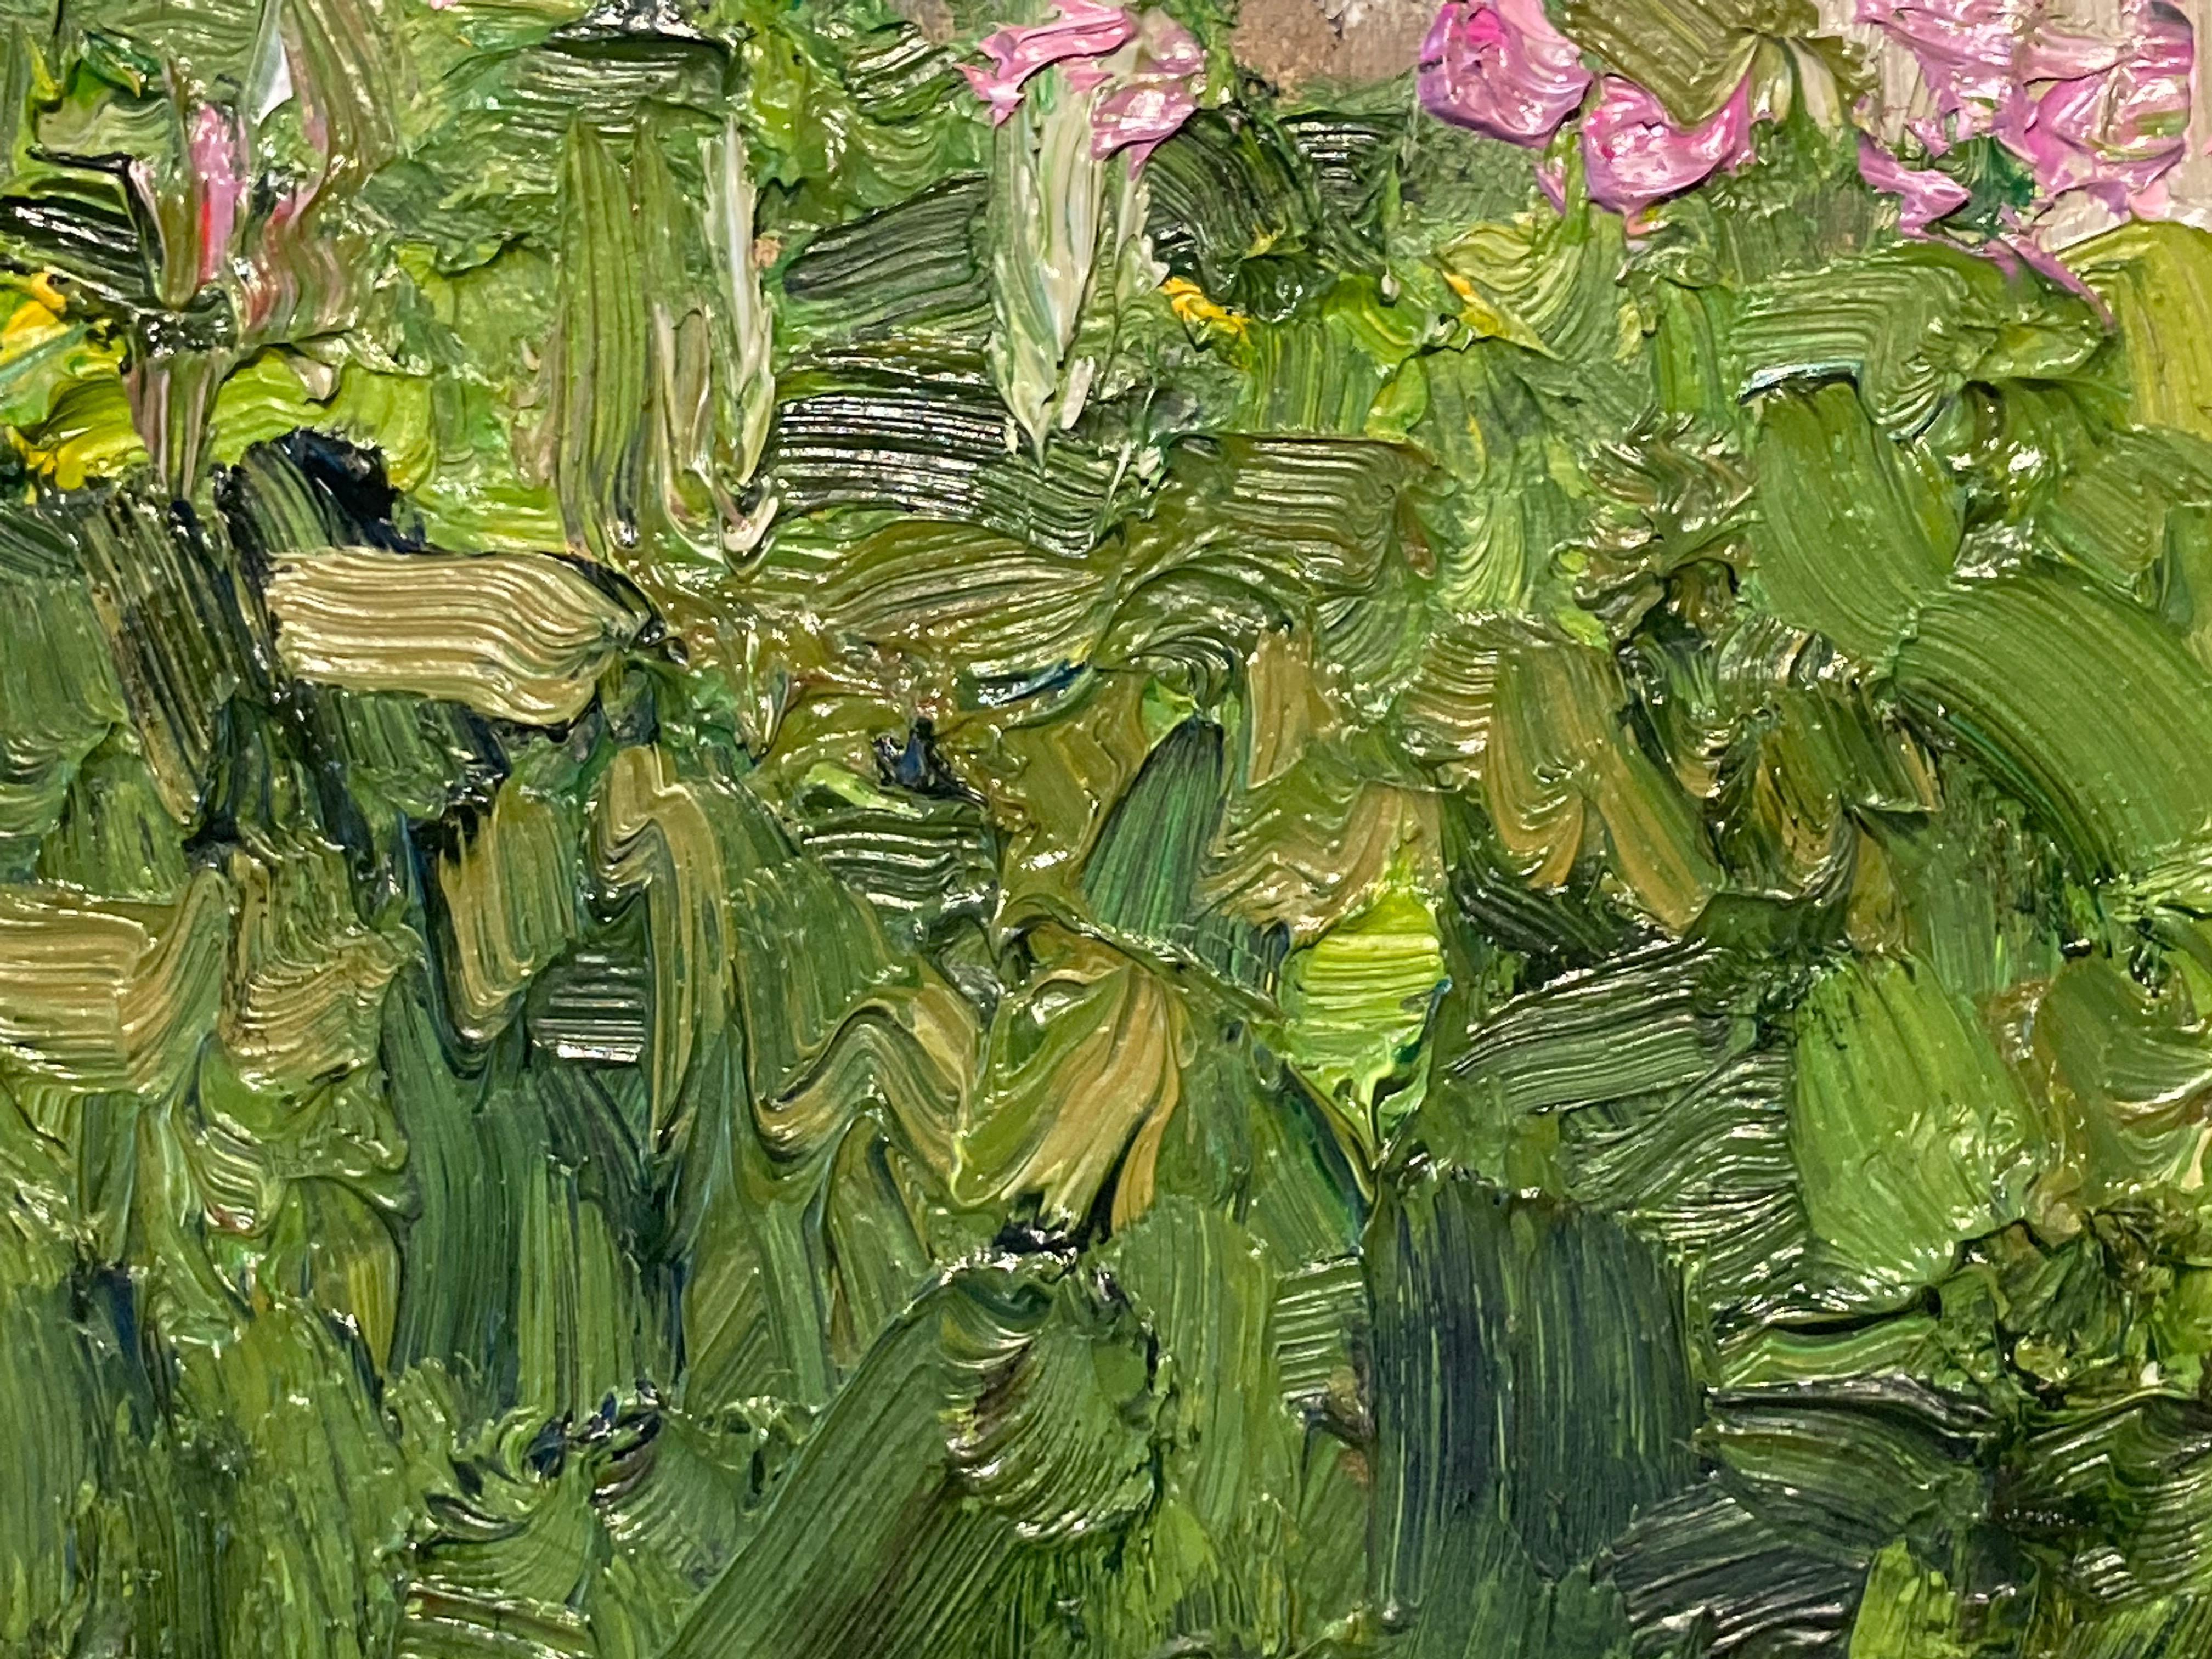 This impressionistic oil on canvas painted by artist James Cobb depicts a cluster of pink hollyhocks among grass behind the fence line of a nearby home. Cobb uses heavy paint application to highlight the overgrown nature of the green brush and